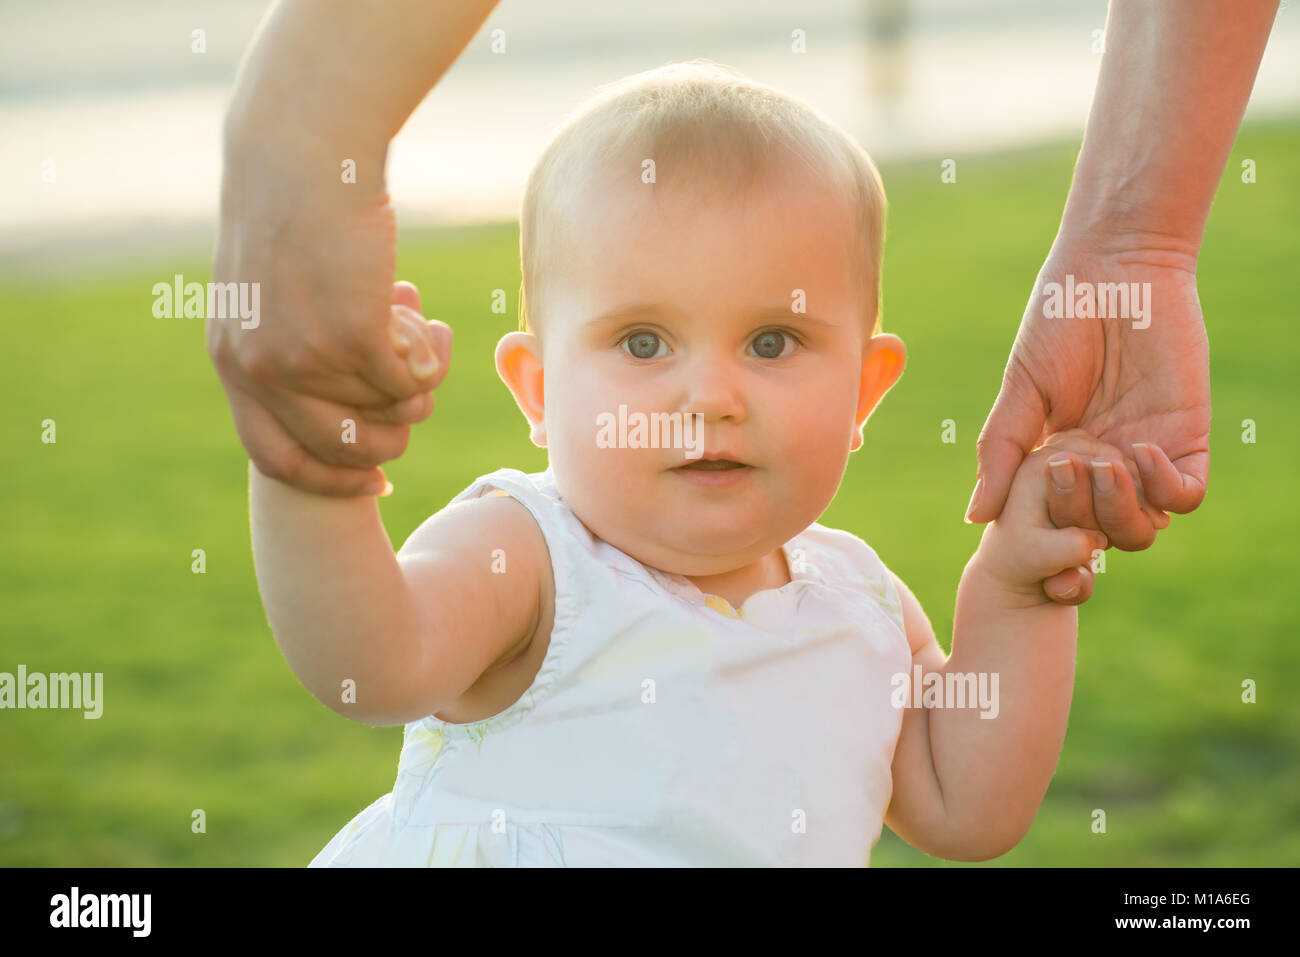 Portrait Of A Cute Baby Girl's Hand Hold By Her Mother At Outdoors Stock Photo